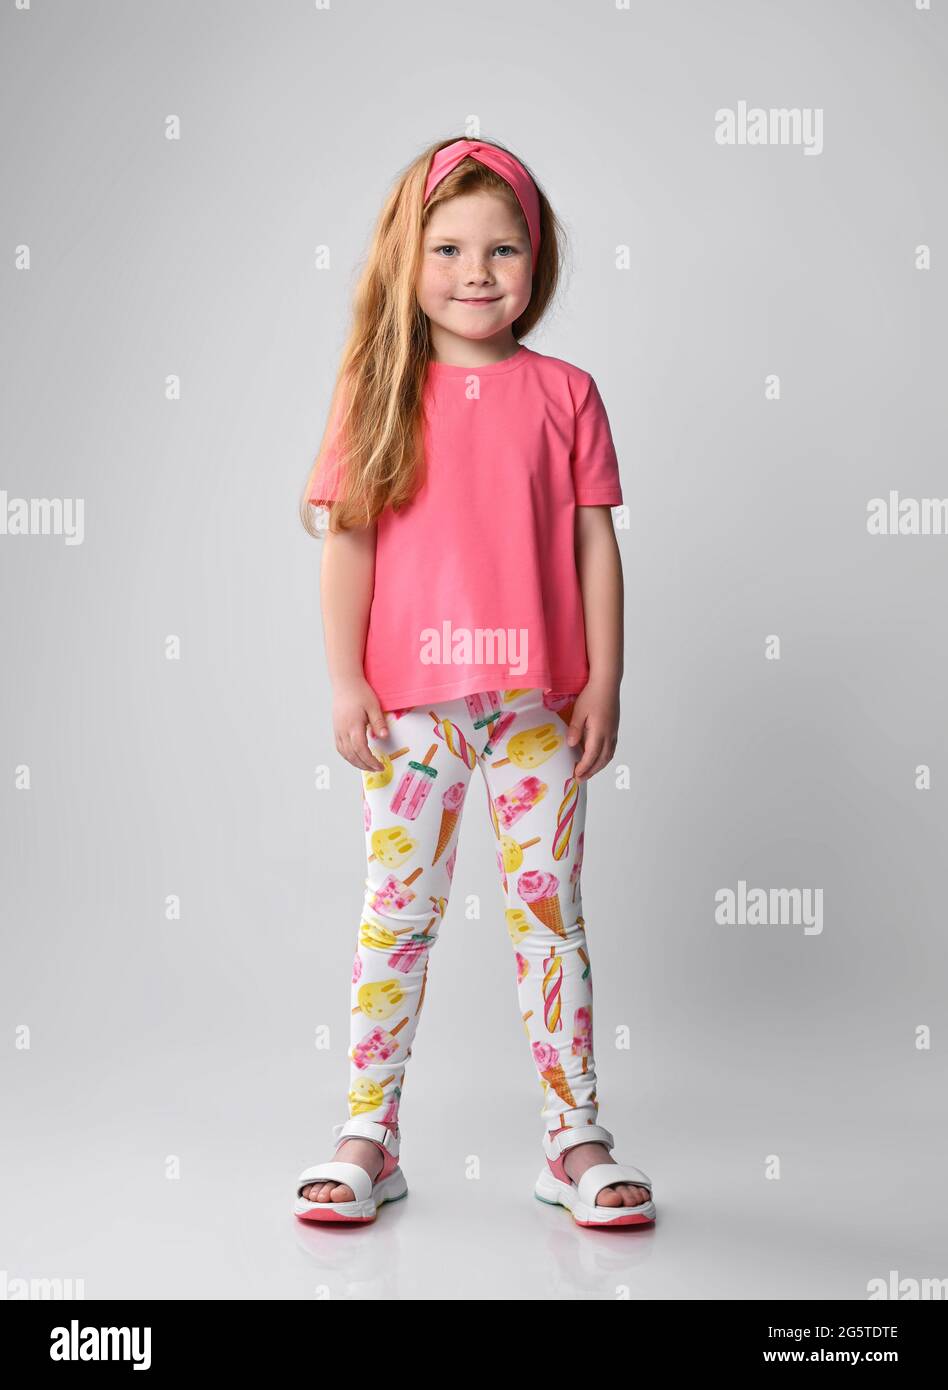 Cute smiling red-haired kid girl stands in summer girlish wear pink t-shirt, colorful pants with print and sandals Stock Photo